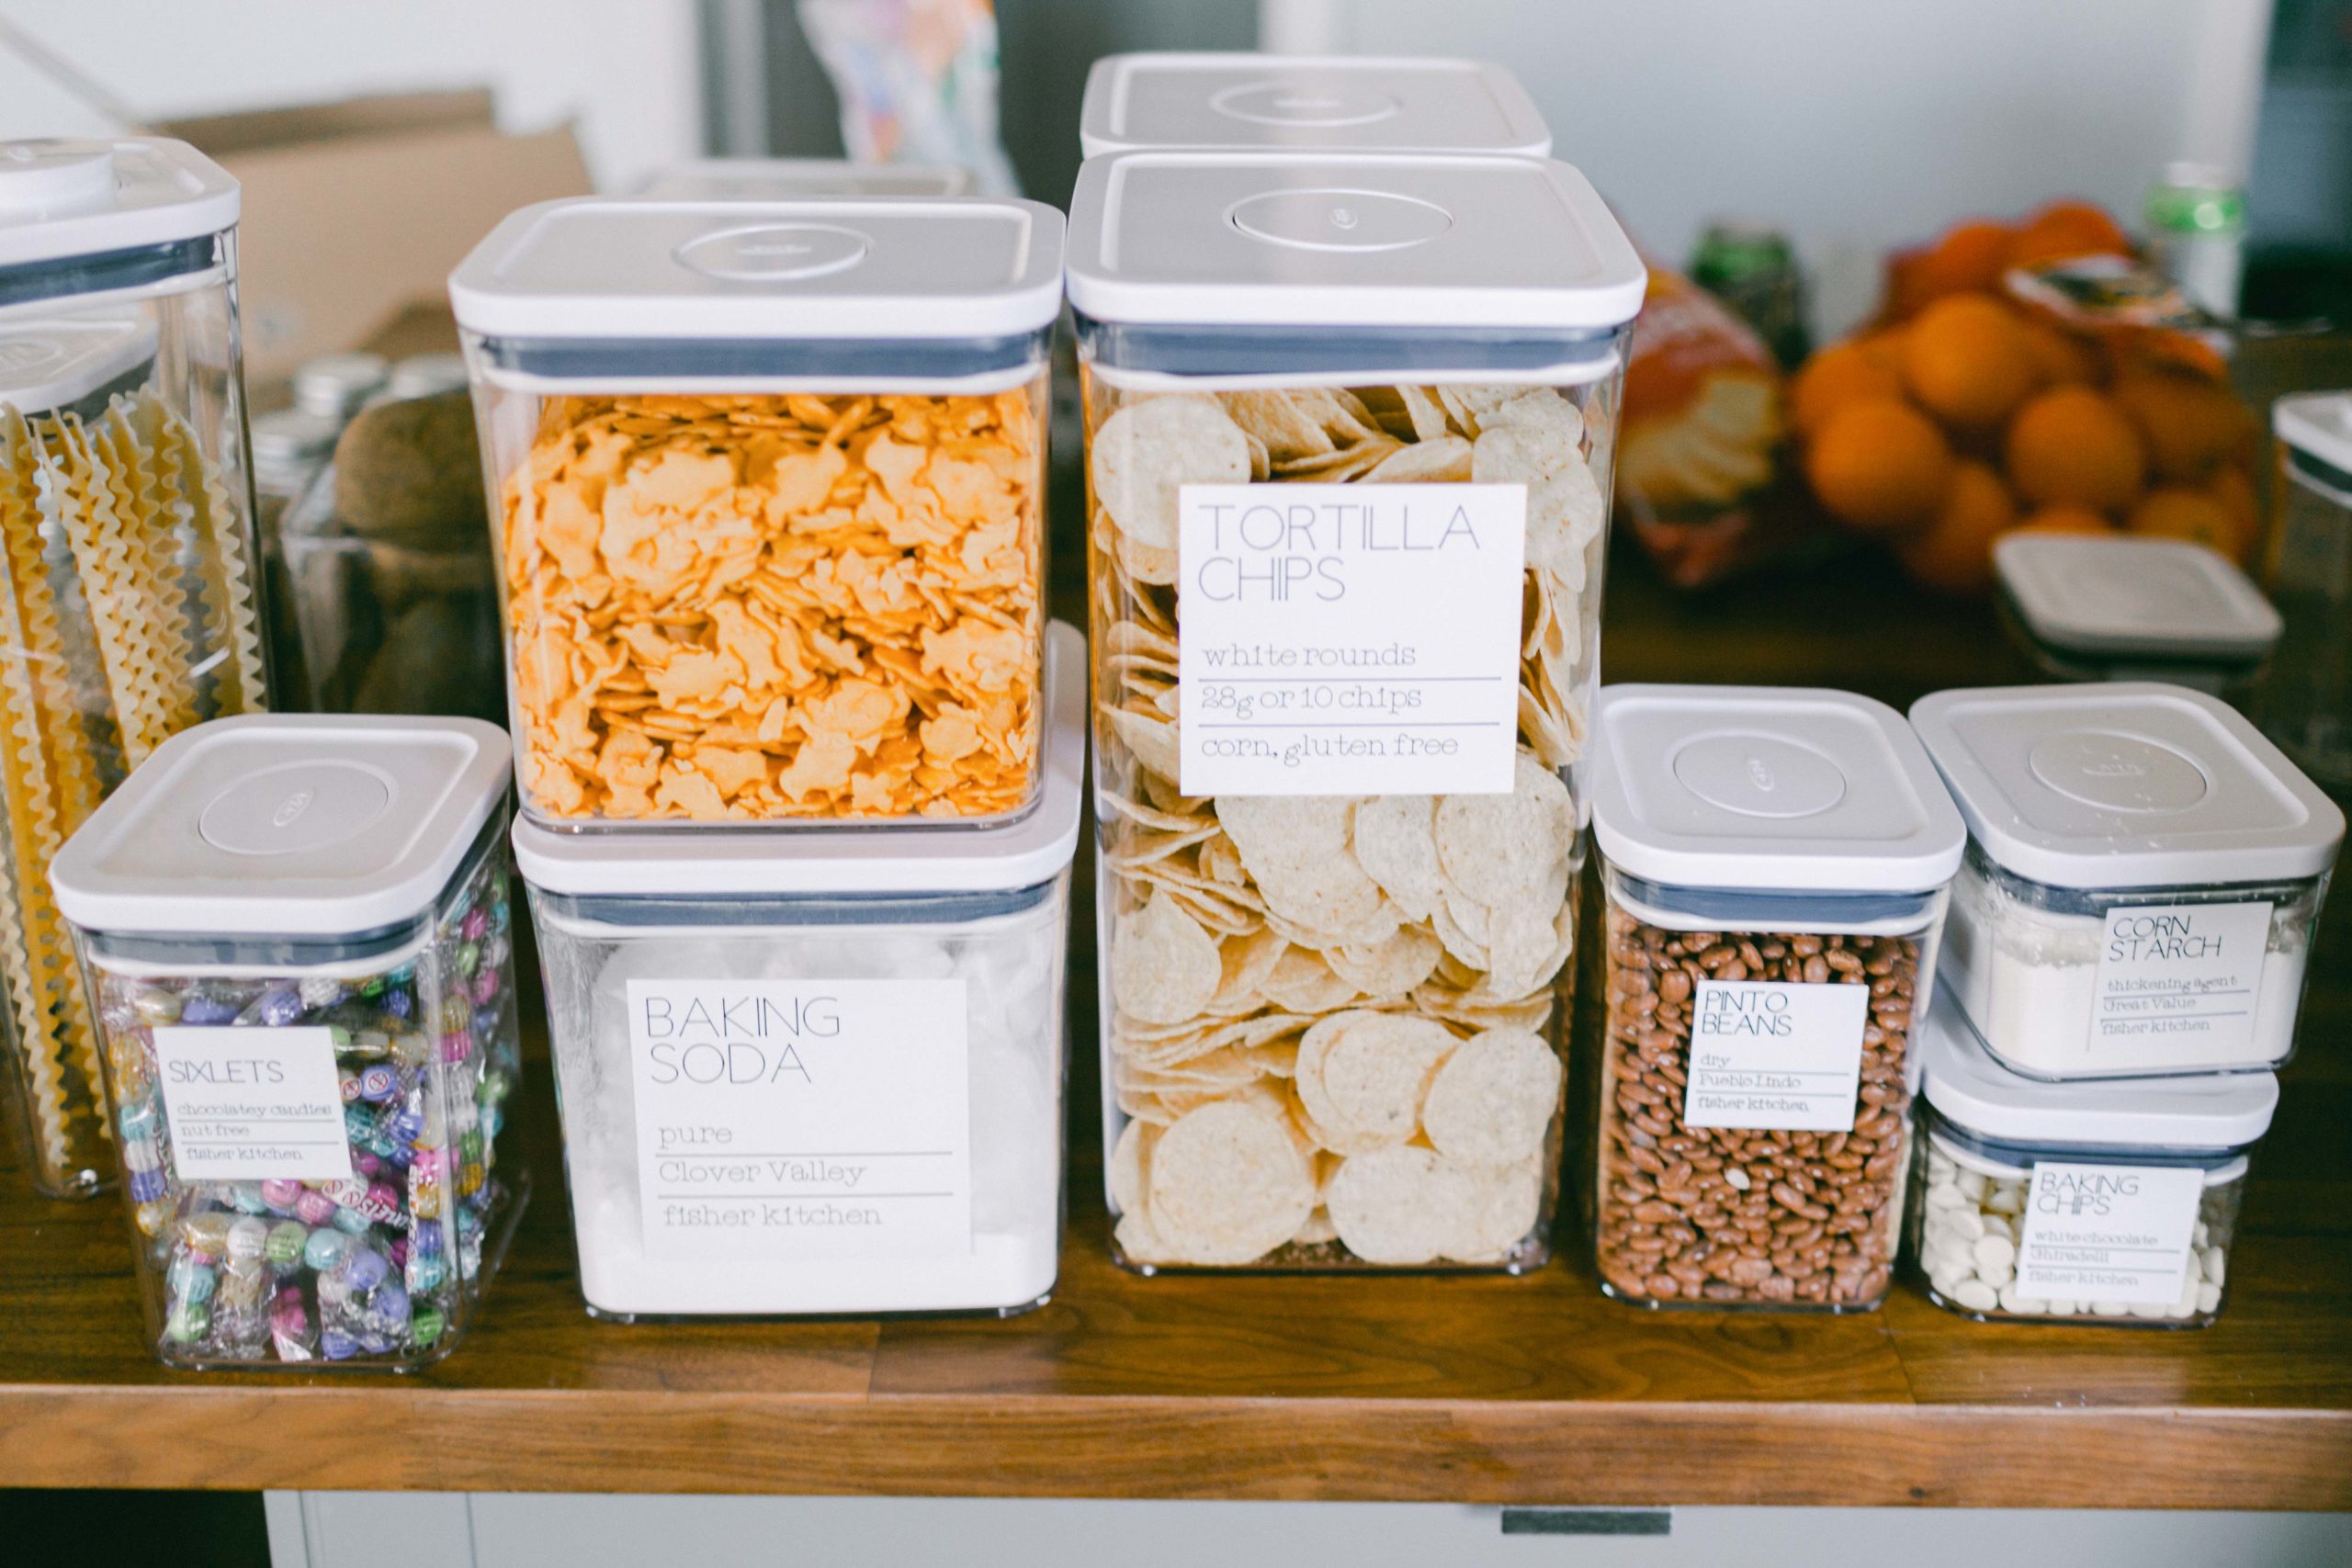 VIDEO]: How To Organize Food Storage Containers And Tupperware